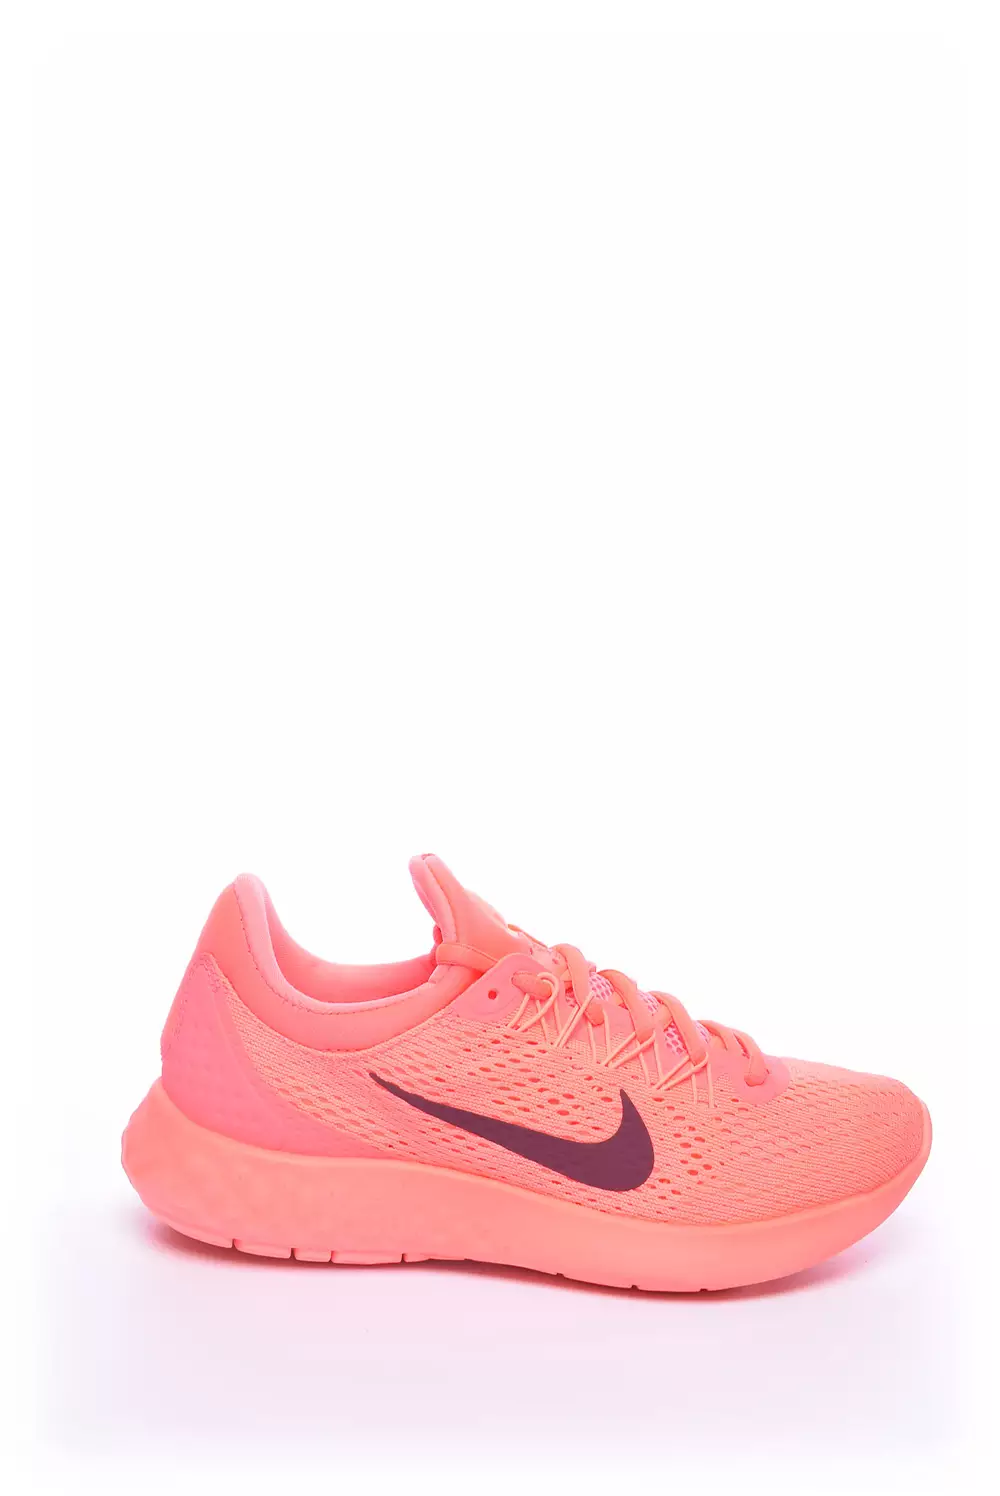 Revision King Lear Prominent Sneakers dama Lunar Skyelux - Nike | Shoemix.ro